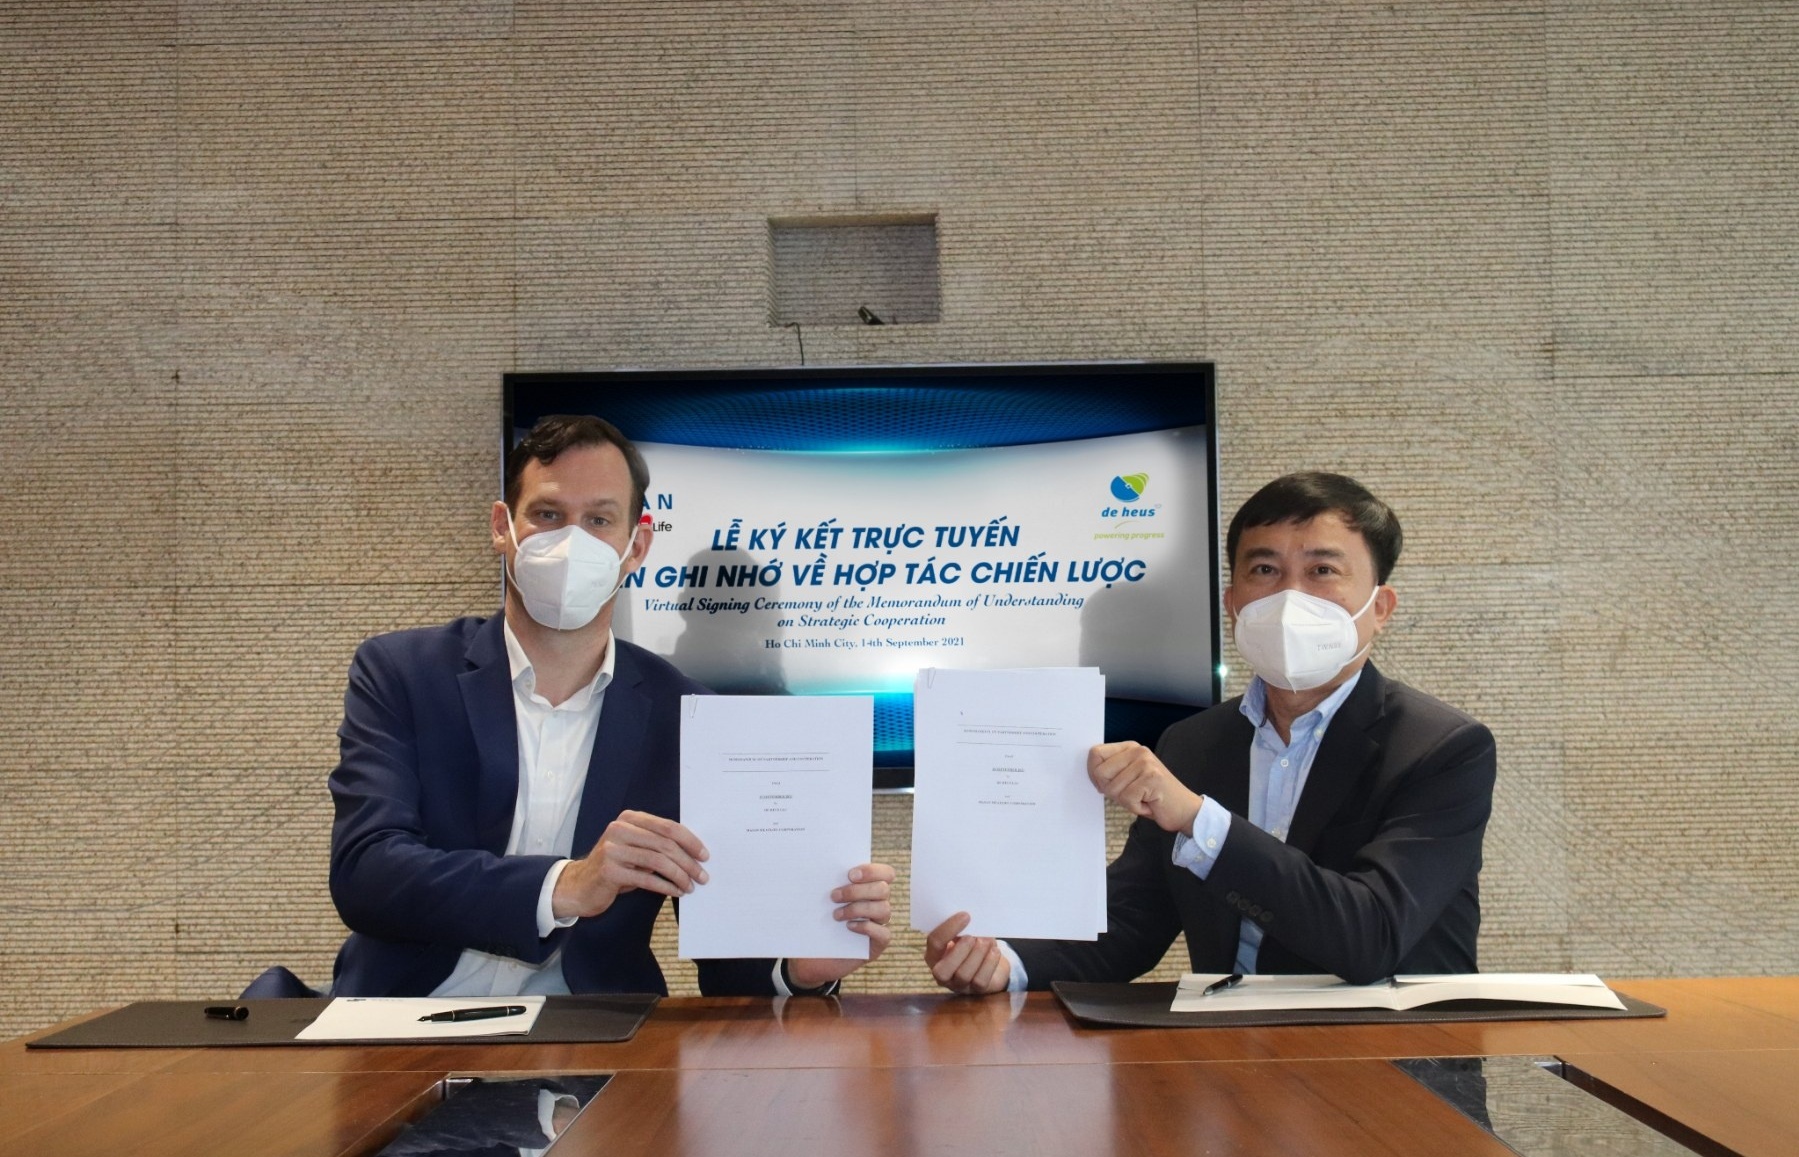 Masan inks deal with De Heus to improve animal protein value chain